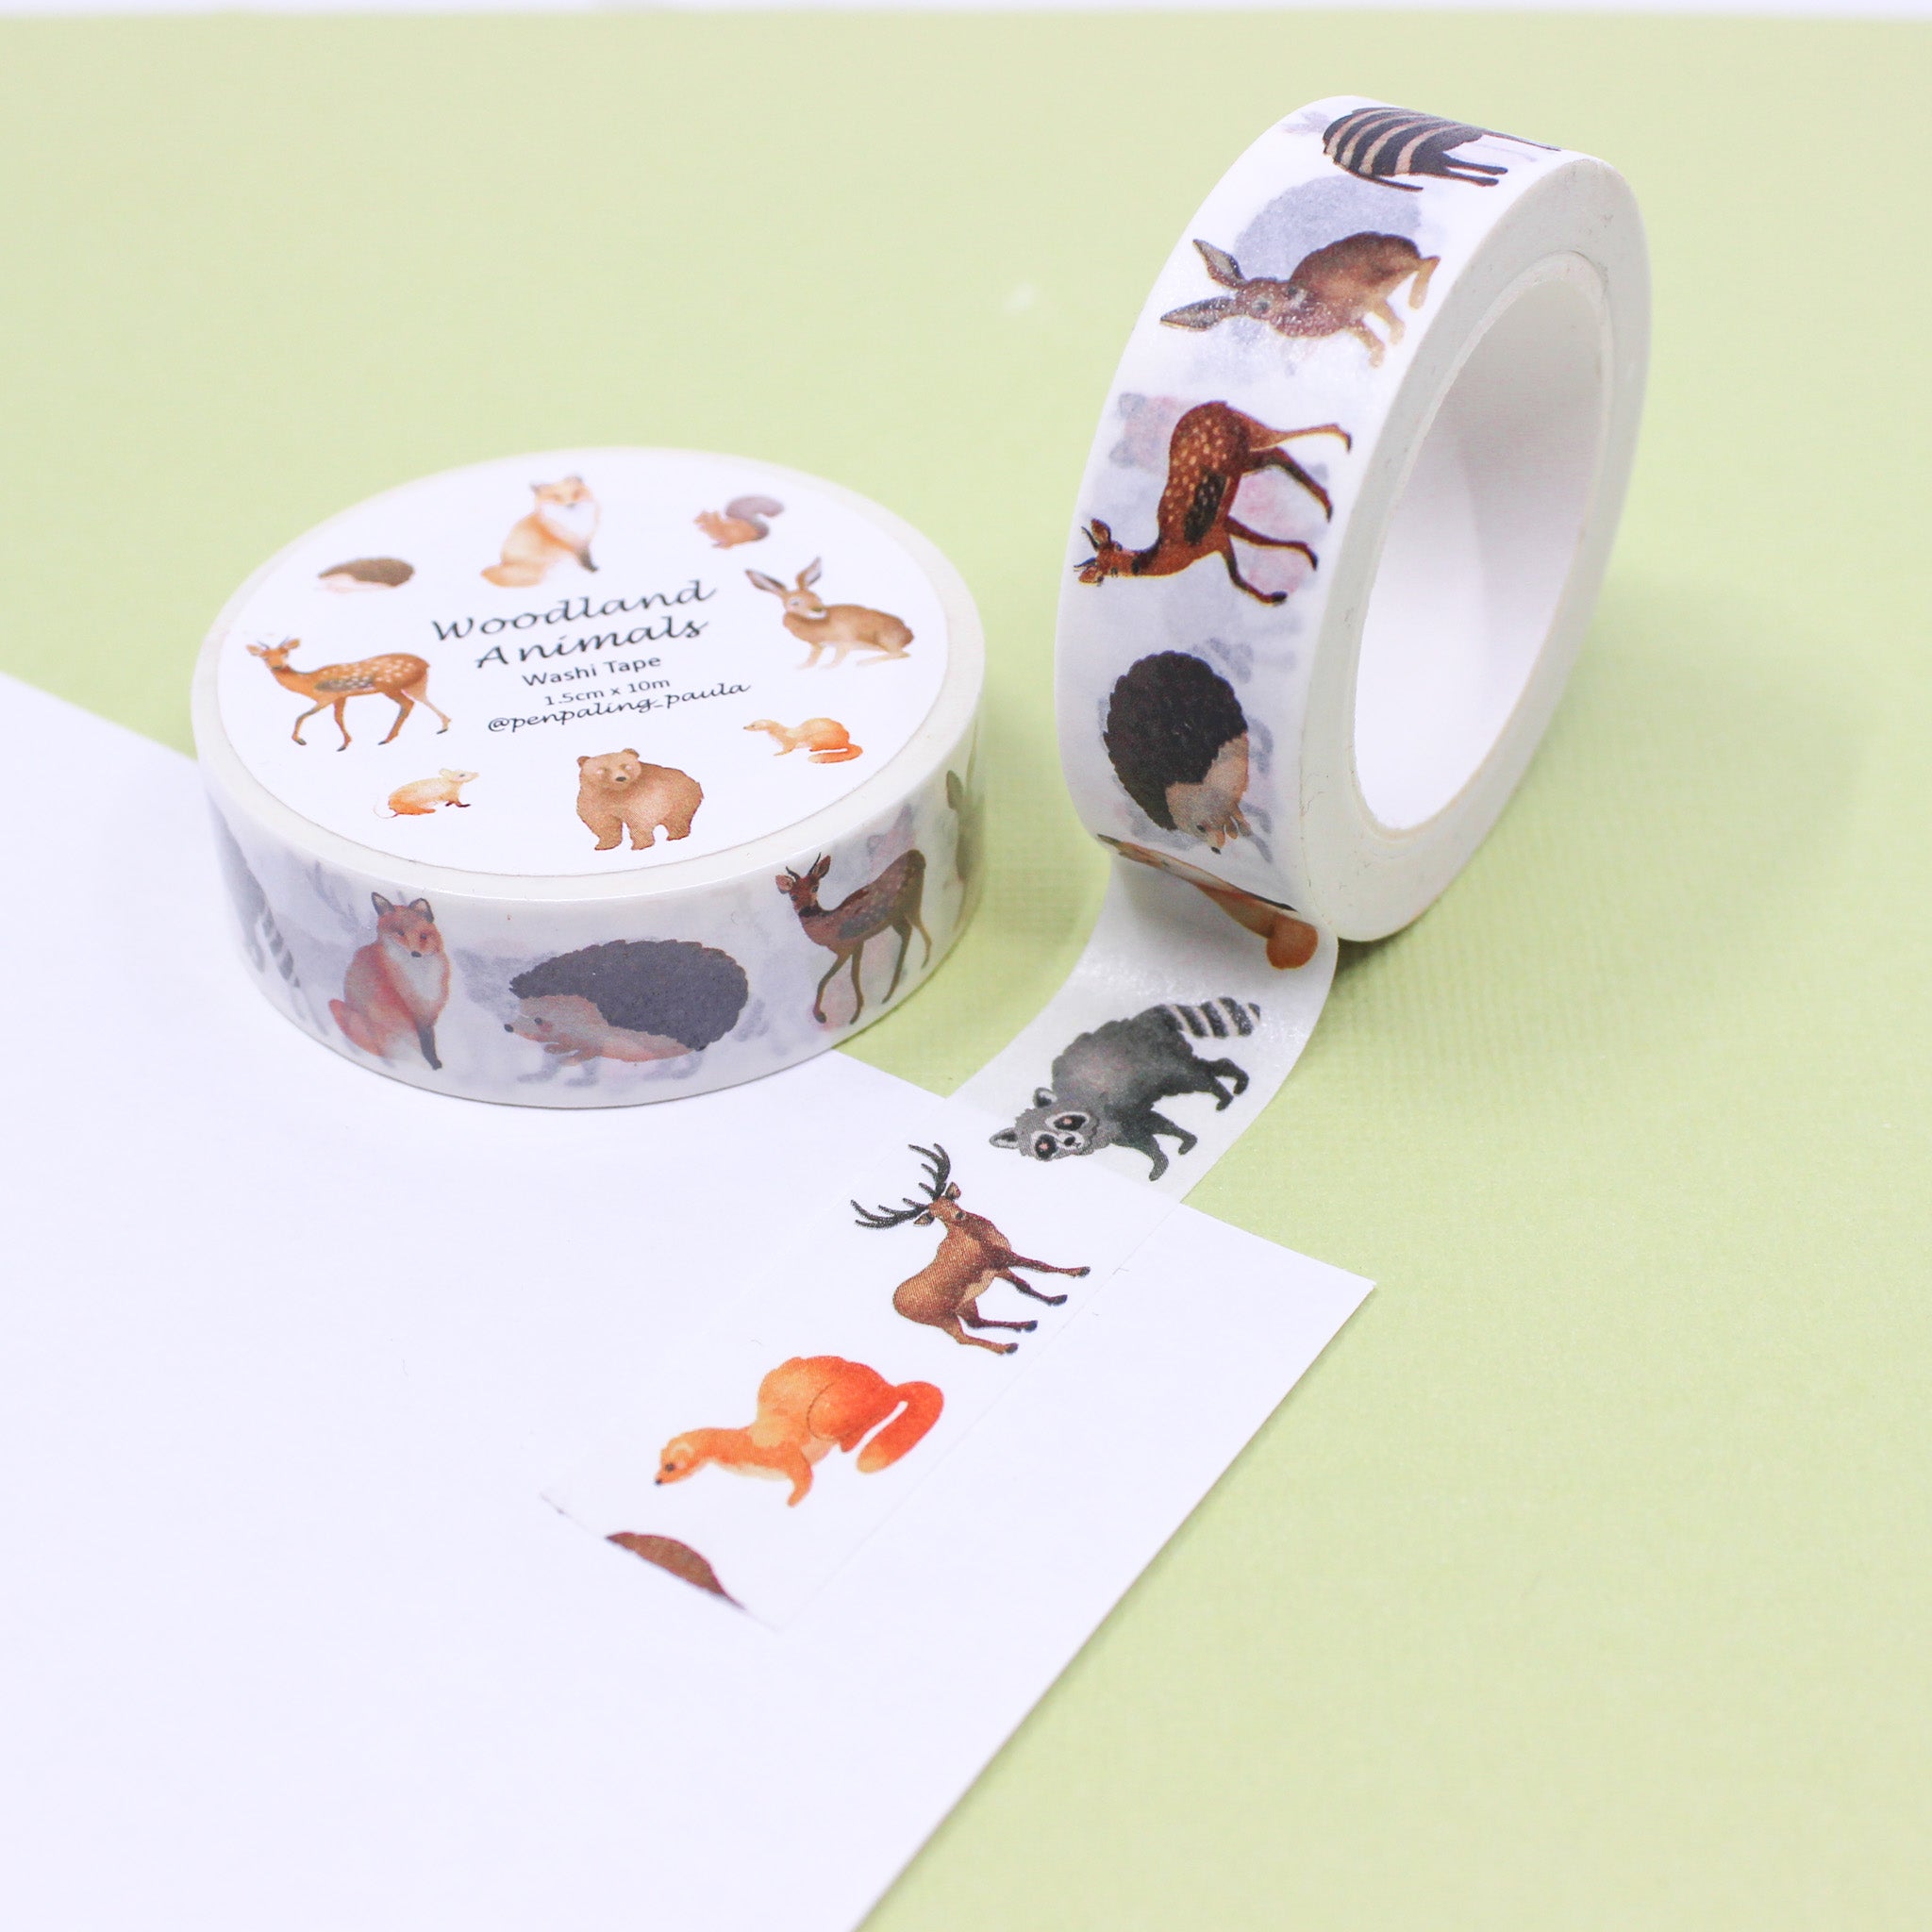 This is a woodland creatures pattern washi tape from BBB Supplies Craft Shop